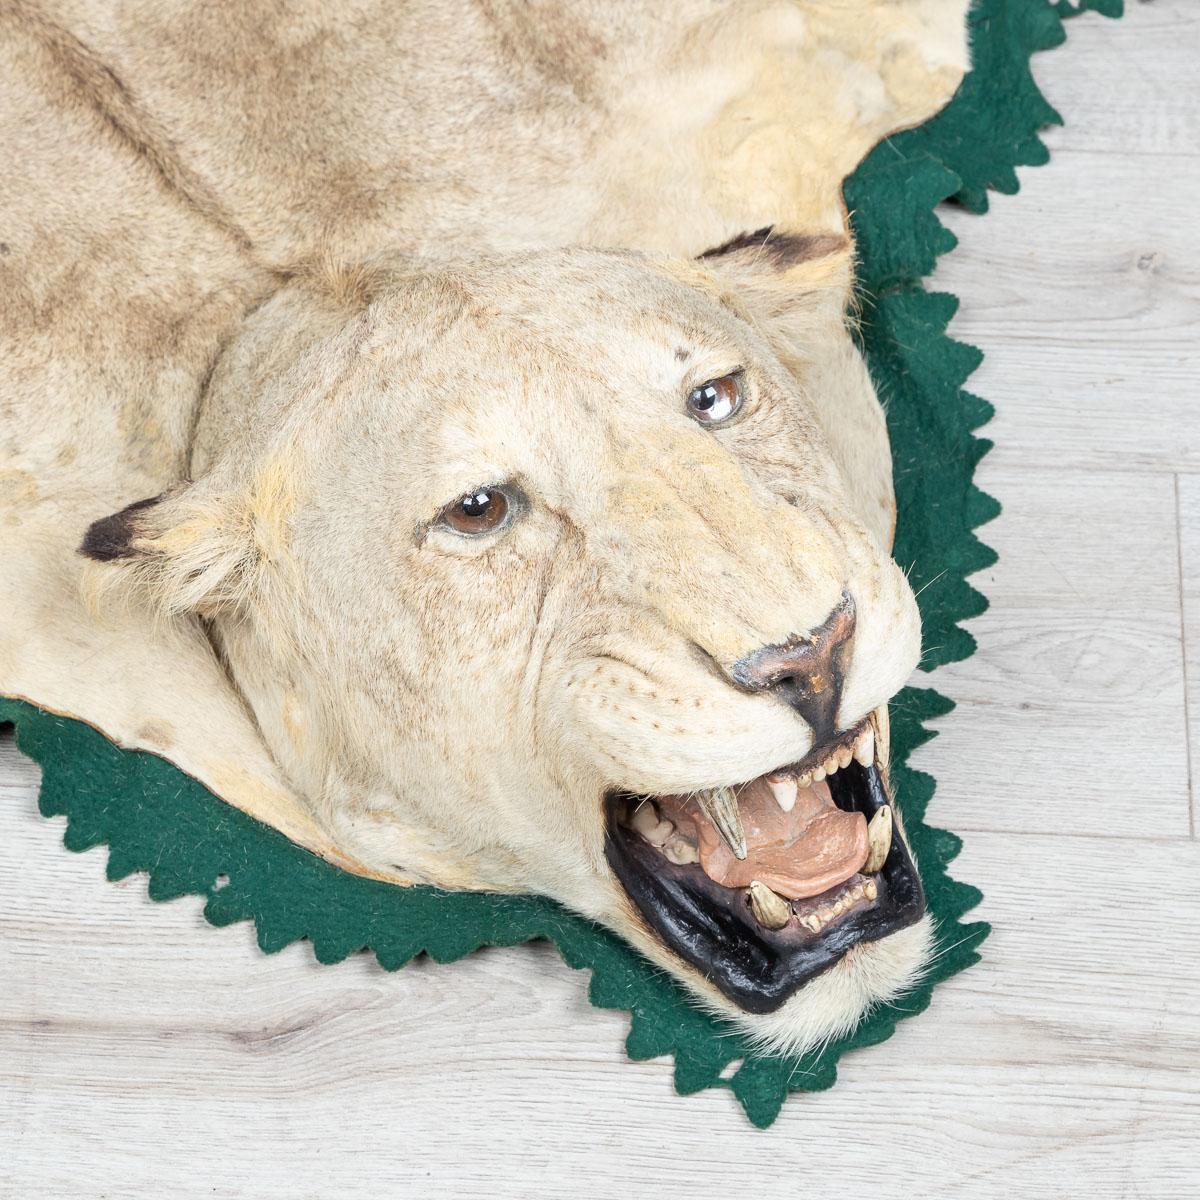 A well prepared taxidermy study of a lion by the renowned taxidermists Edward Gerrard and Sons, London, circa 1920.

Edward Gerrard & sons, in existence circa 1850-1967, was founded by Edward Gerrard (1810-1910) while employed as an attendant at